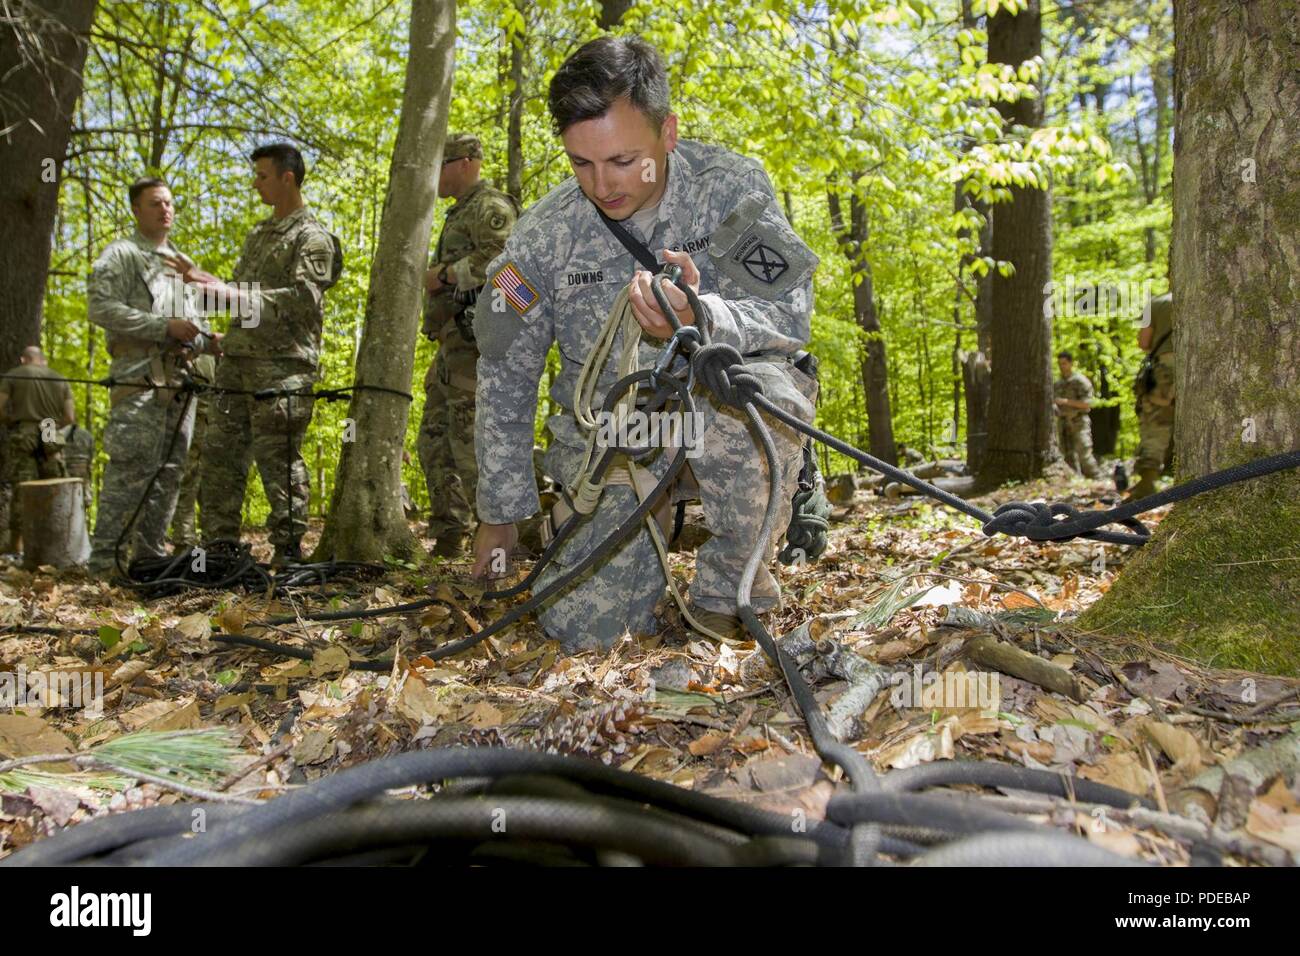 U.S. Army Spc. Jake Downs, Charlie Company, 3rd Battalion, 172nd Infantry Regiment, 86th Infantry Brigade Combat Team (Mountain), New Hampshire National Guard, sets up a medical evacuation rope system at Camp Ethan Allen Training Site, Jericho, Vt., May 18, 2018. As part of the basic military mountaineer course at the Army Mountain Warfare School students learn how to utilize the knots and systems they’ve learned to evacuate casualties on a SKEDCO litter. Stock Photo